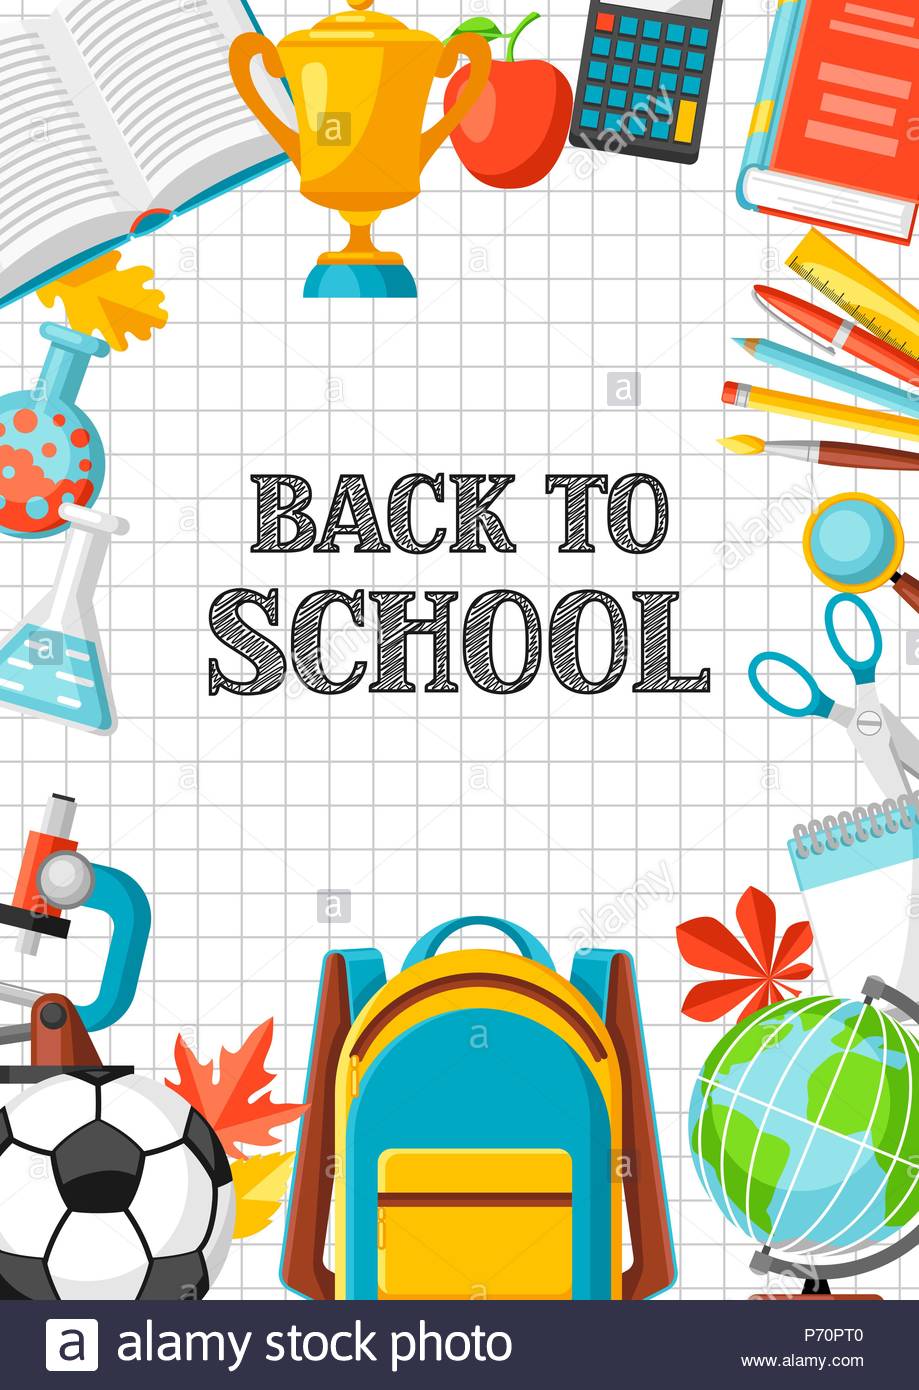 Back To School Background With Education Items Stock Vector Image